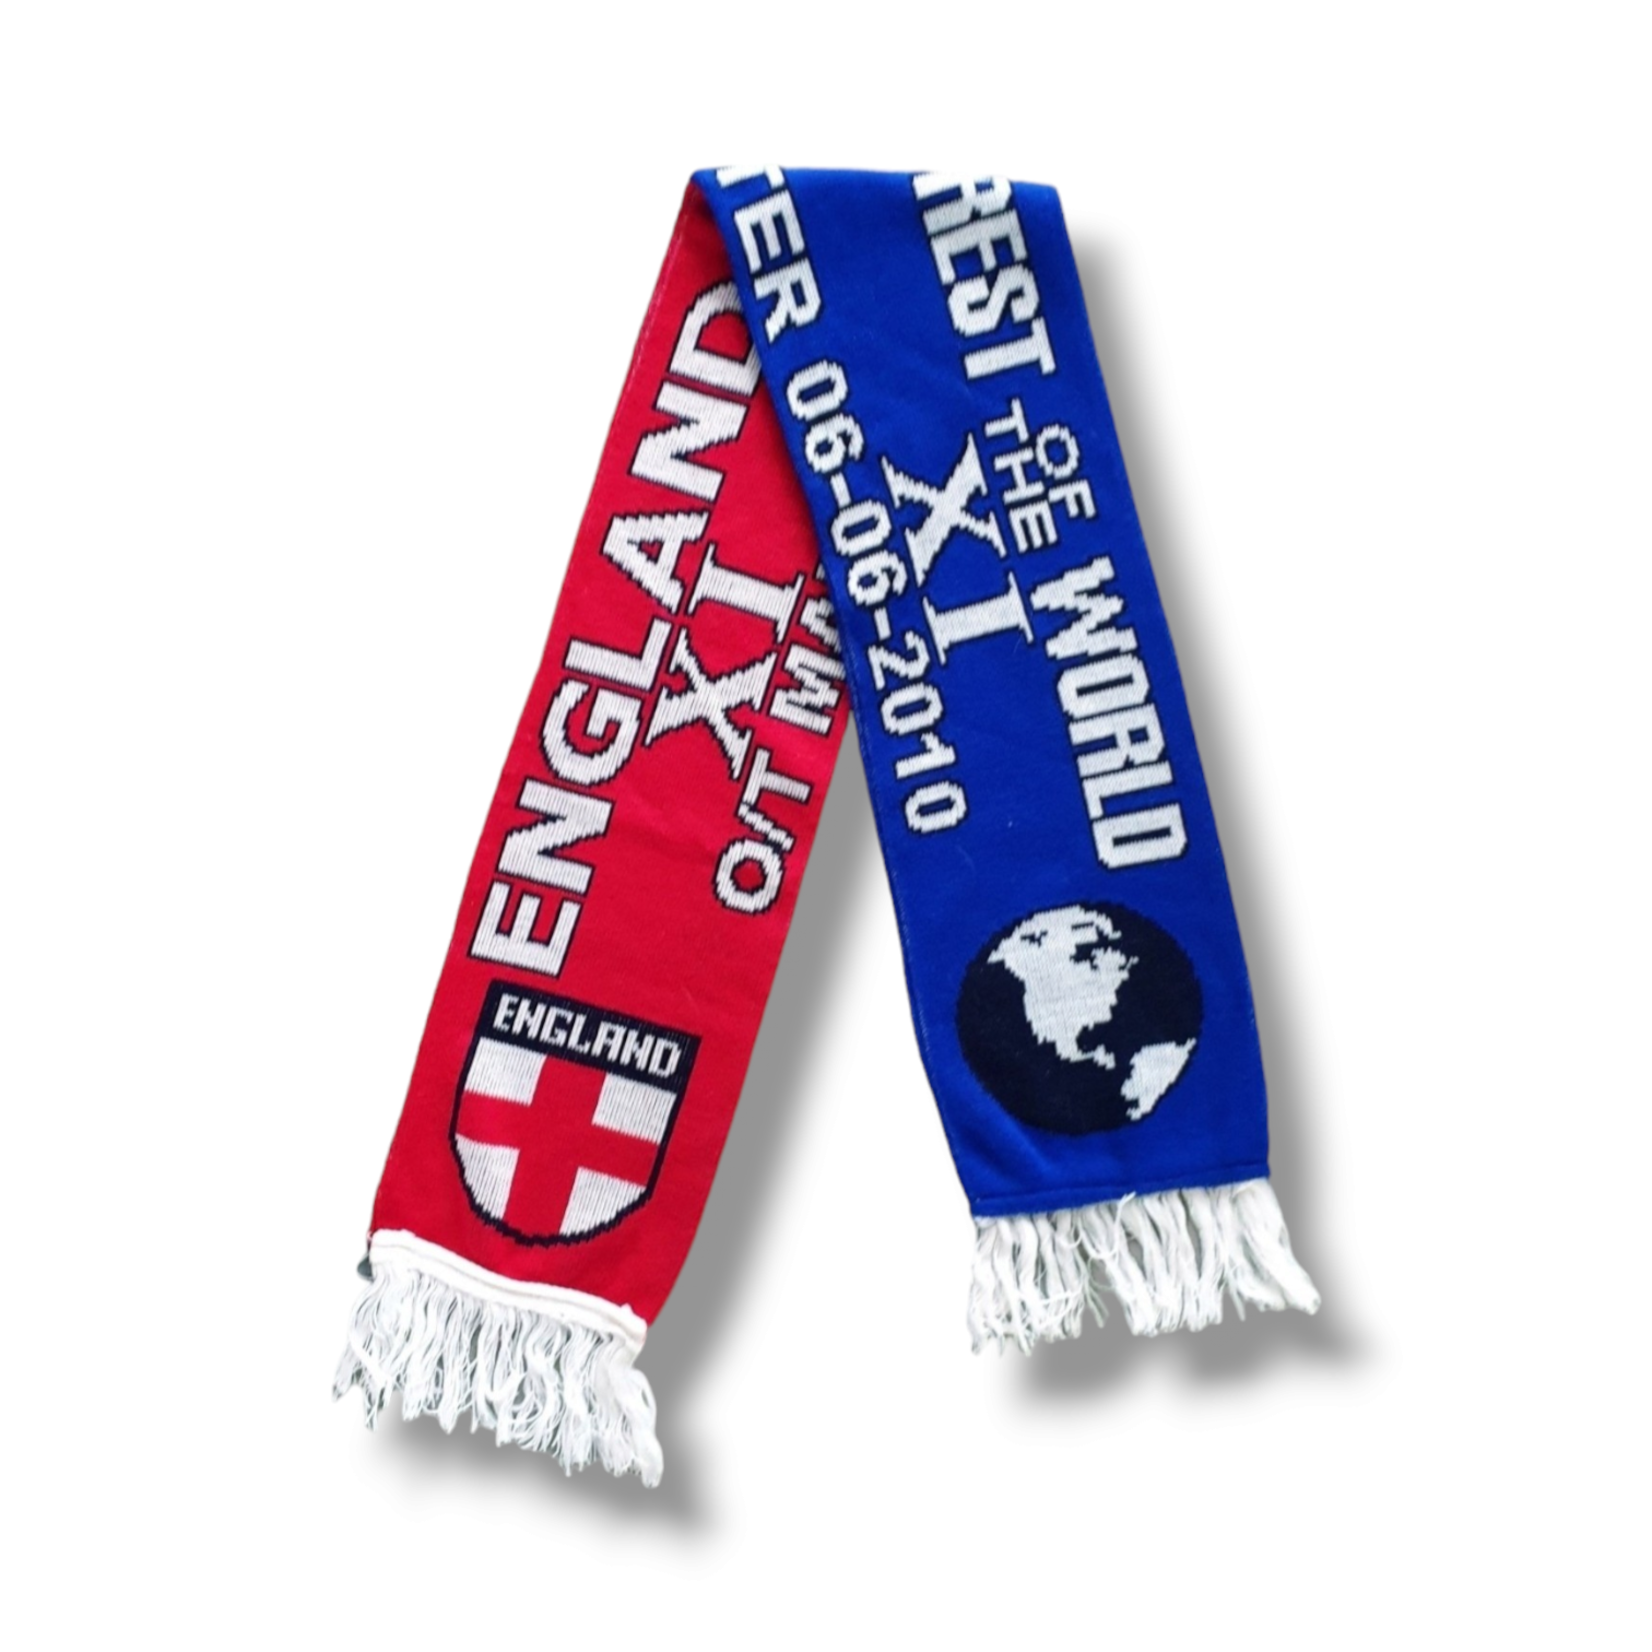 Scarf Original Rugby-Fan-Schal England vs Rest of the World 2010